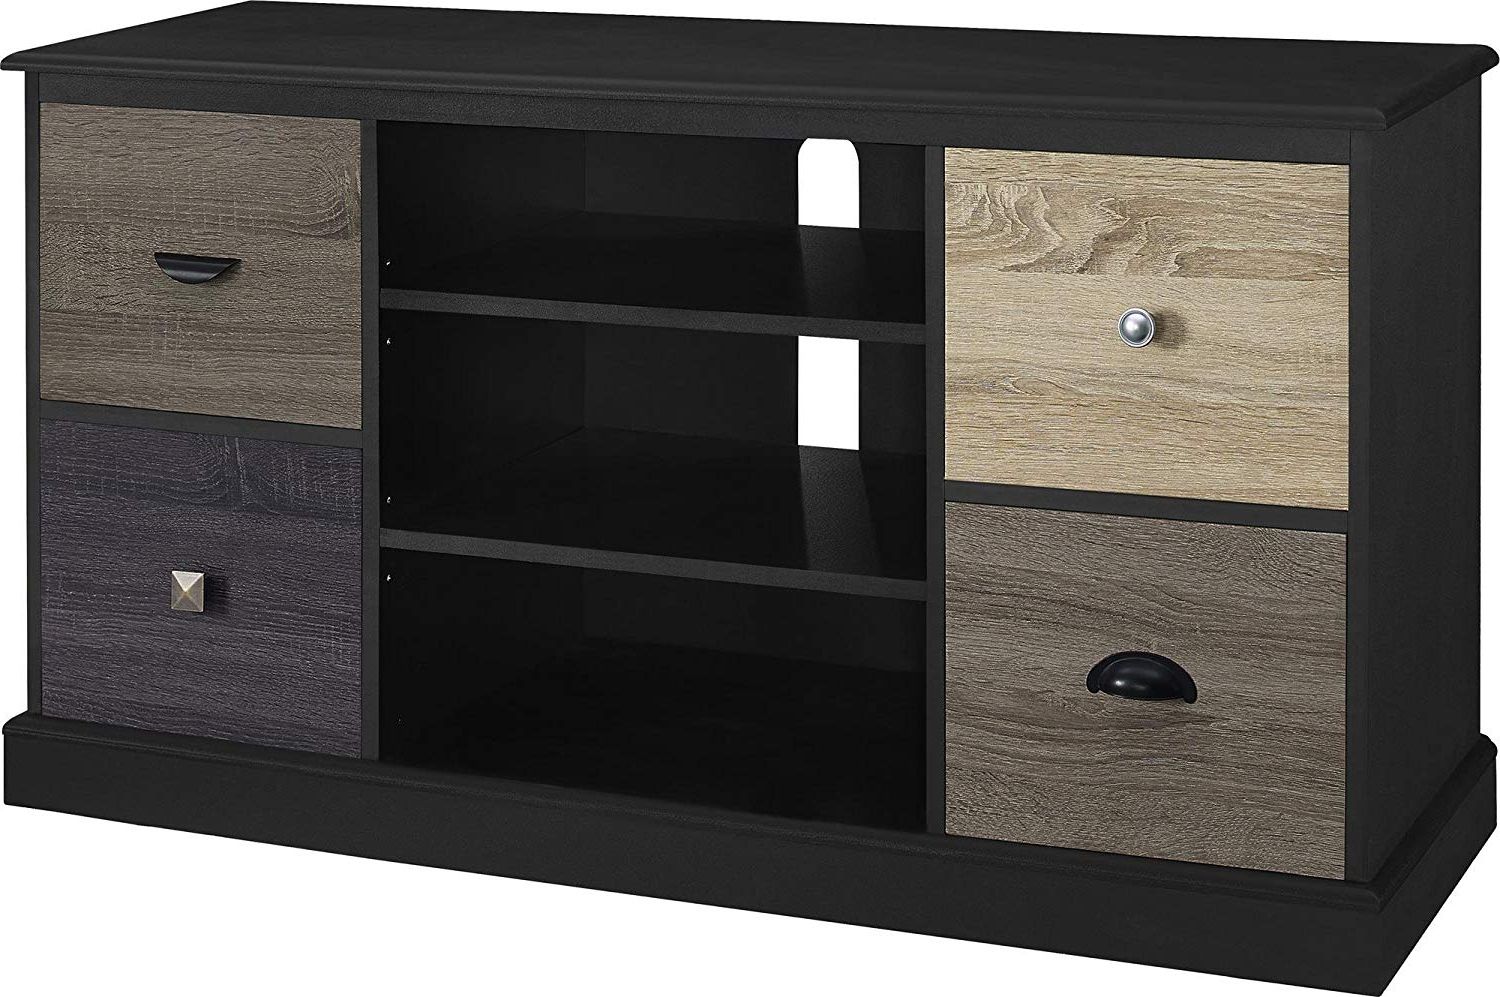 Casey Umber 66 Inch Tv Stands Within Popular Amazon: Ameriwood Home Mercer Tv Console With Multicolored Door (View 17 of 20)